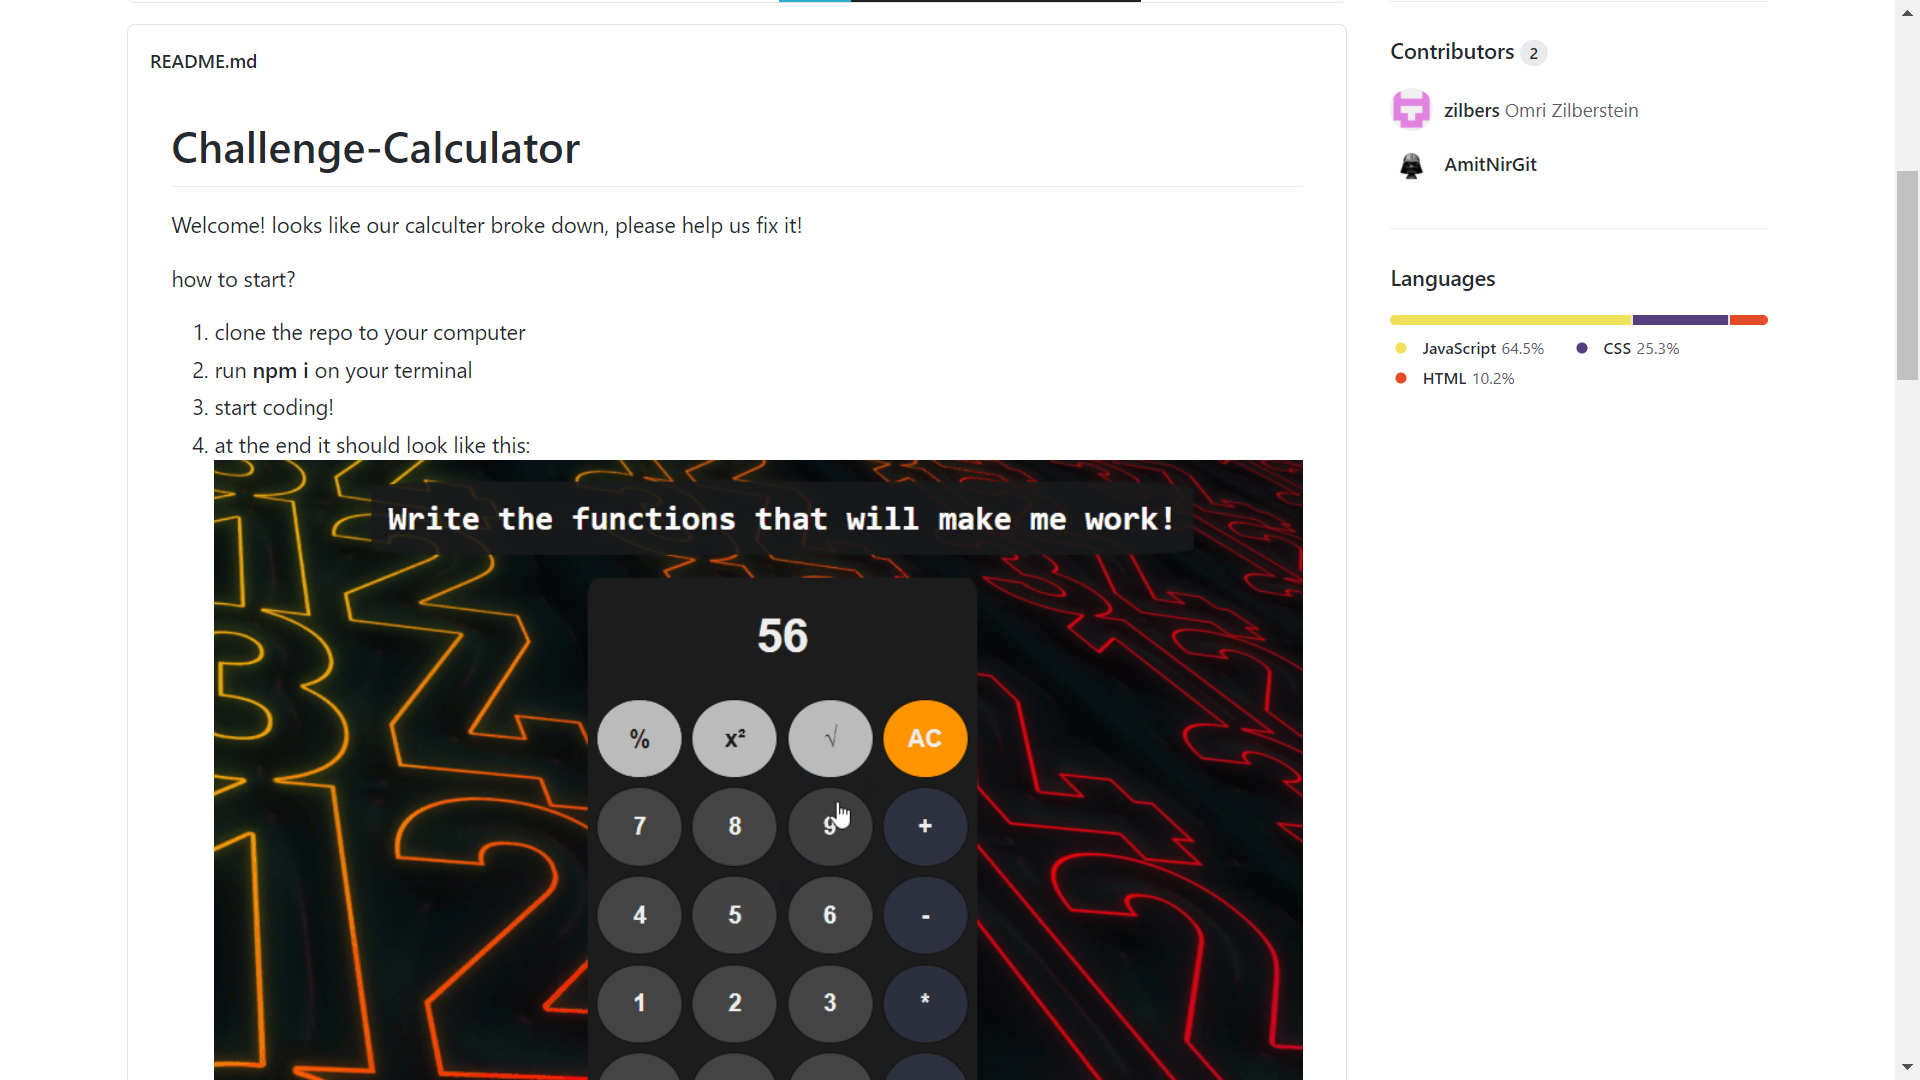 boilerplate repo. we see the title "Challenge-Calculator", as well as some instructions and the 2 Contributors. There is a big illustration of the calculator that completing this challenge produces